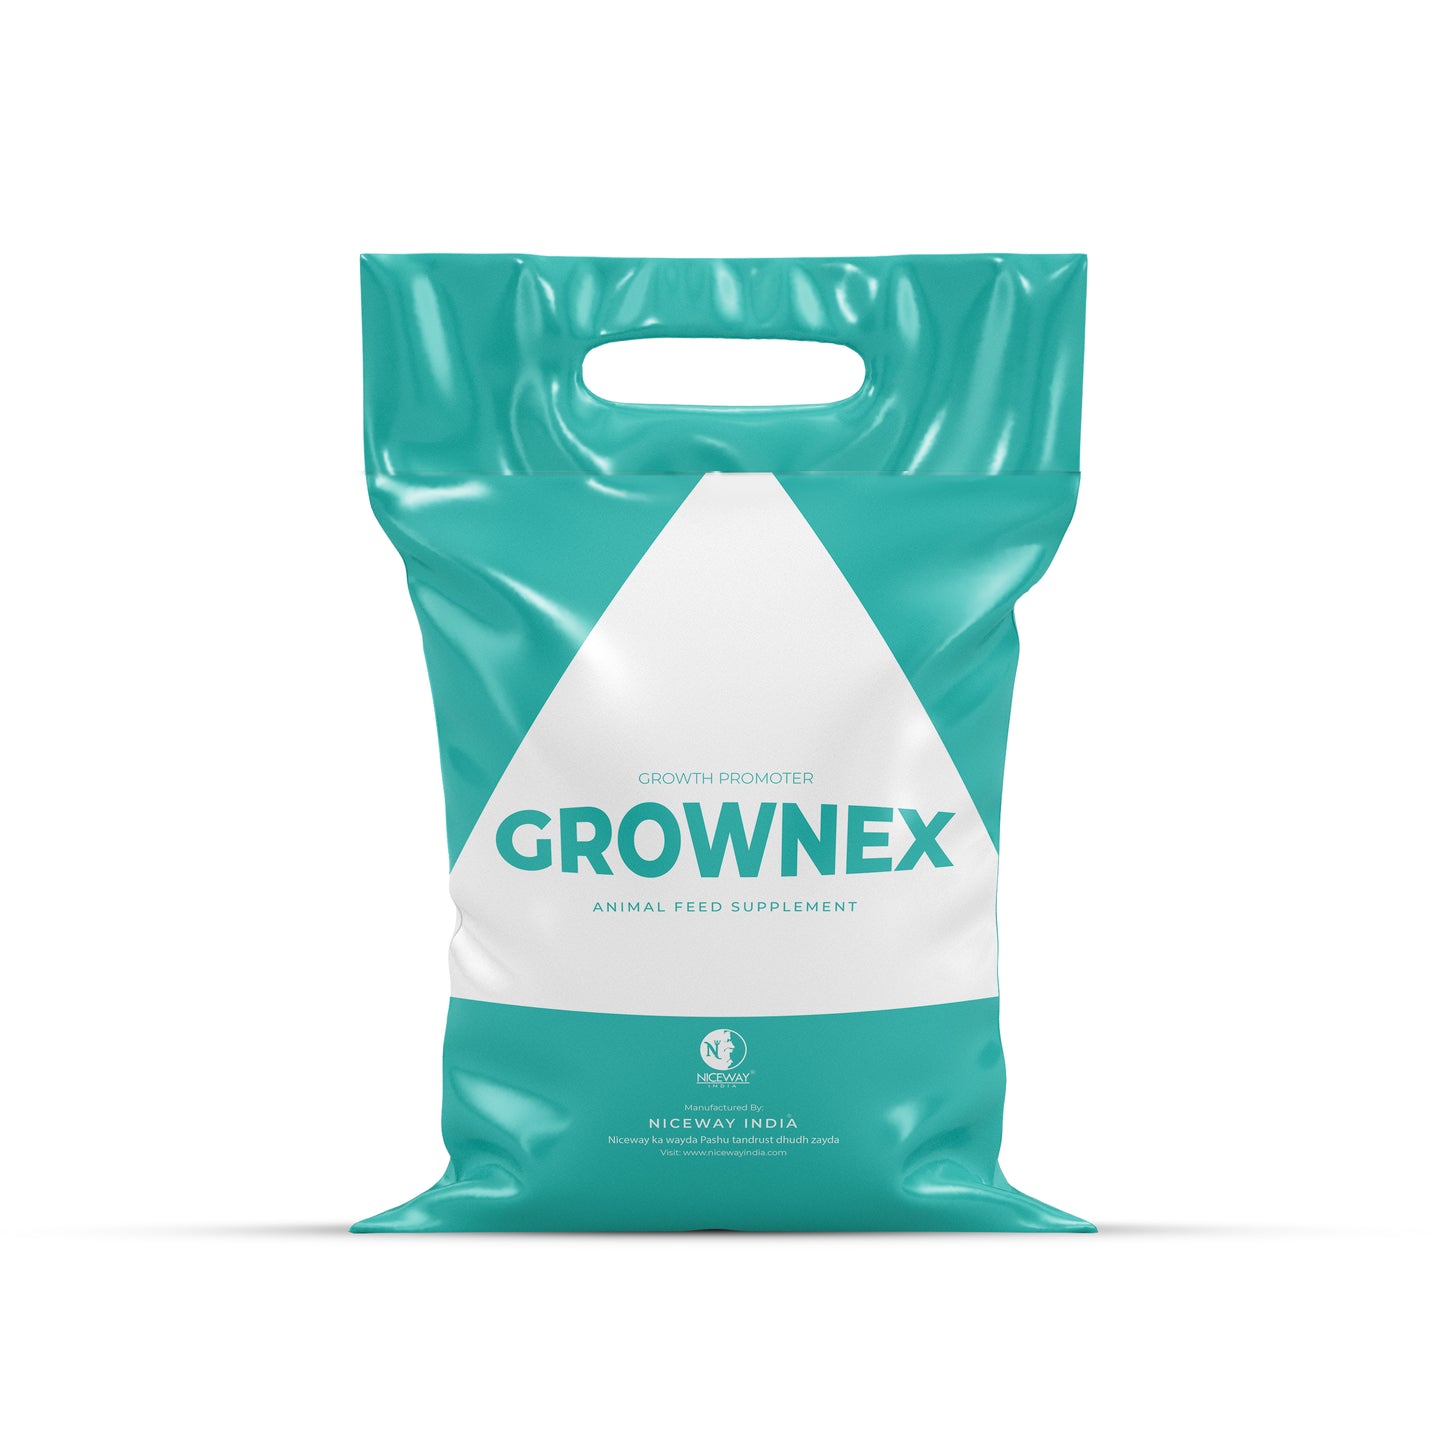 Grownex - Growth Promoter for Ruminants